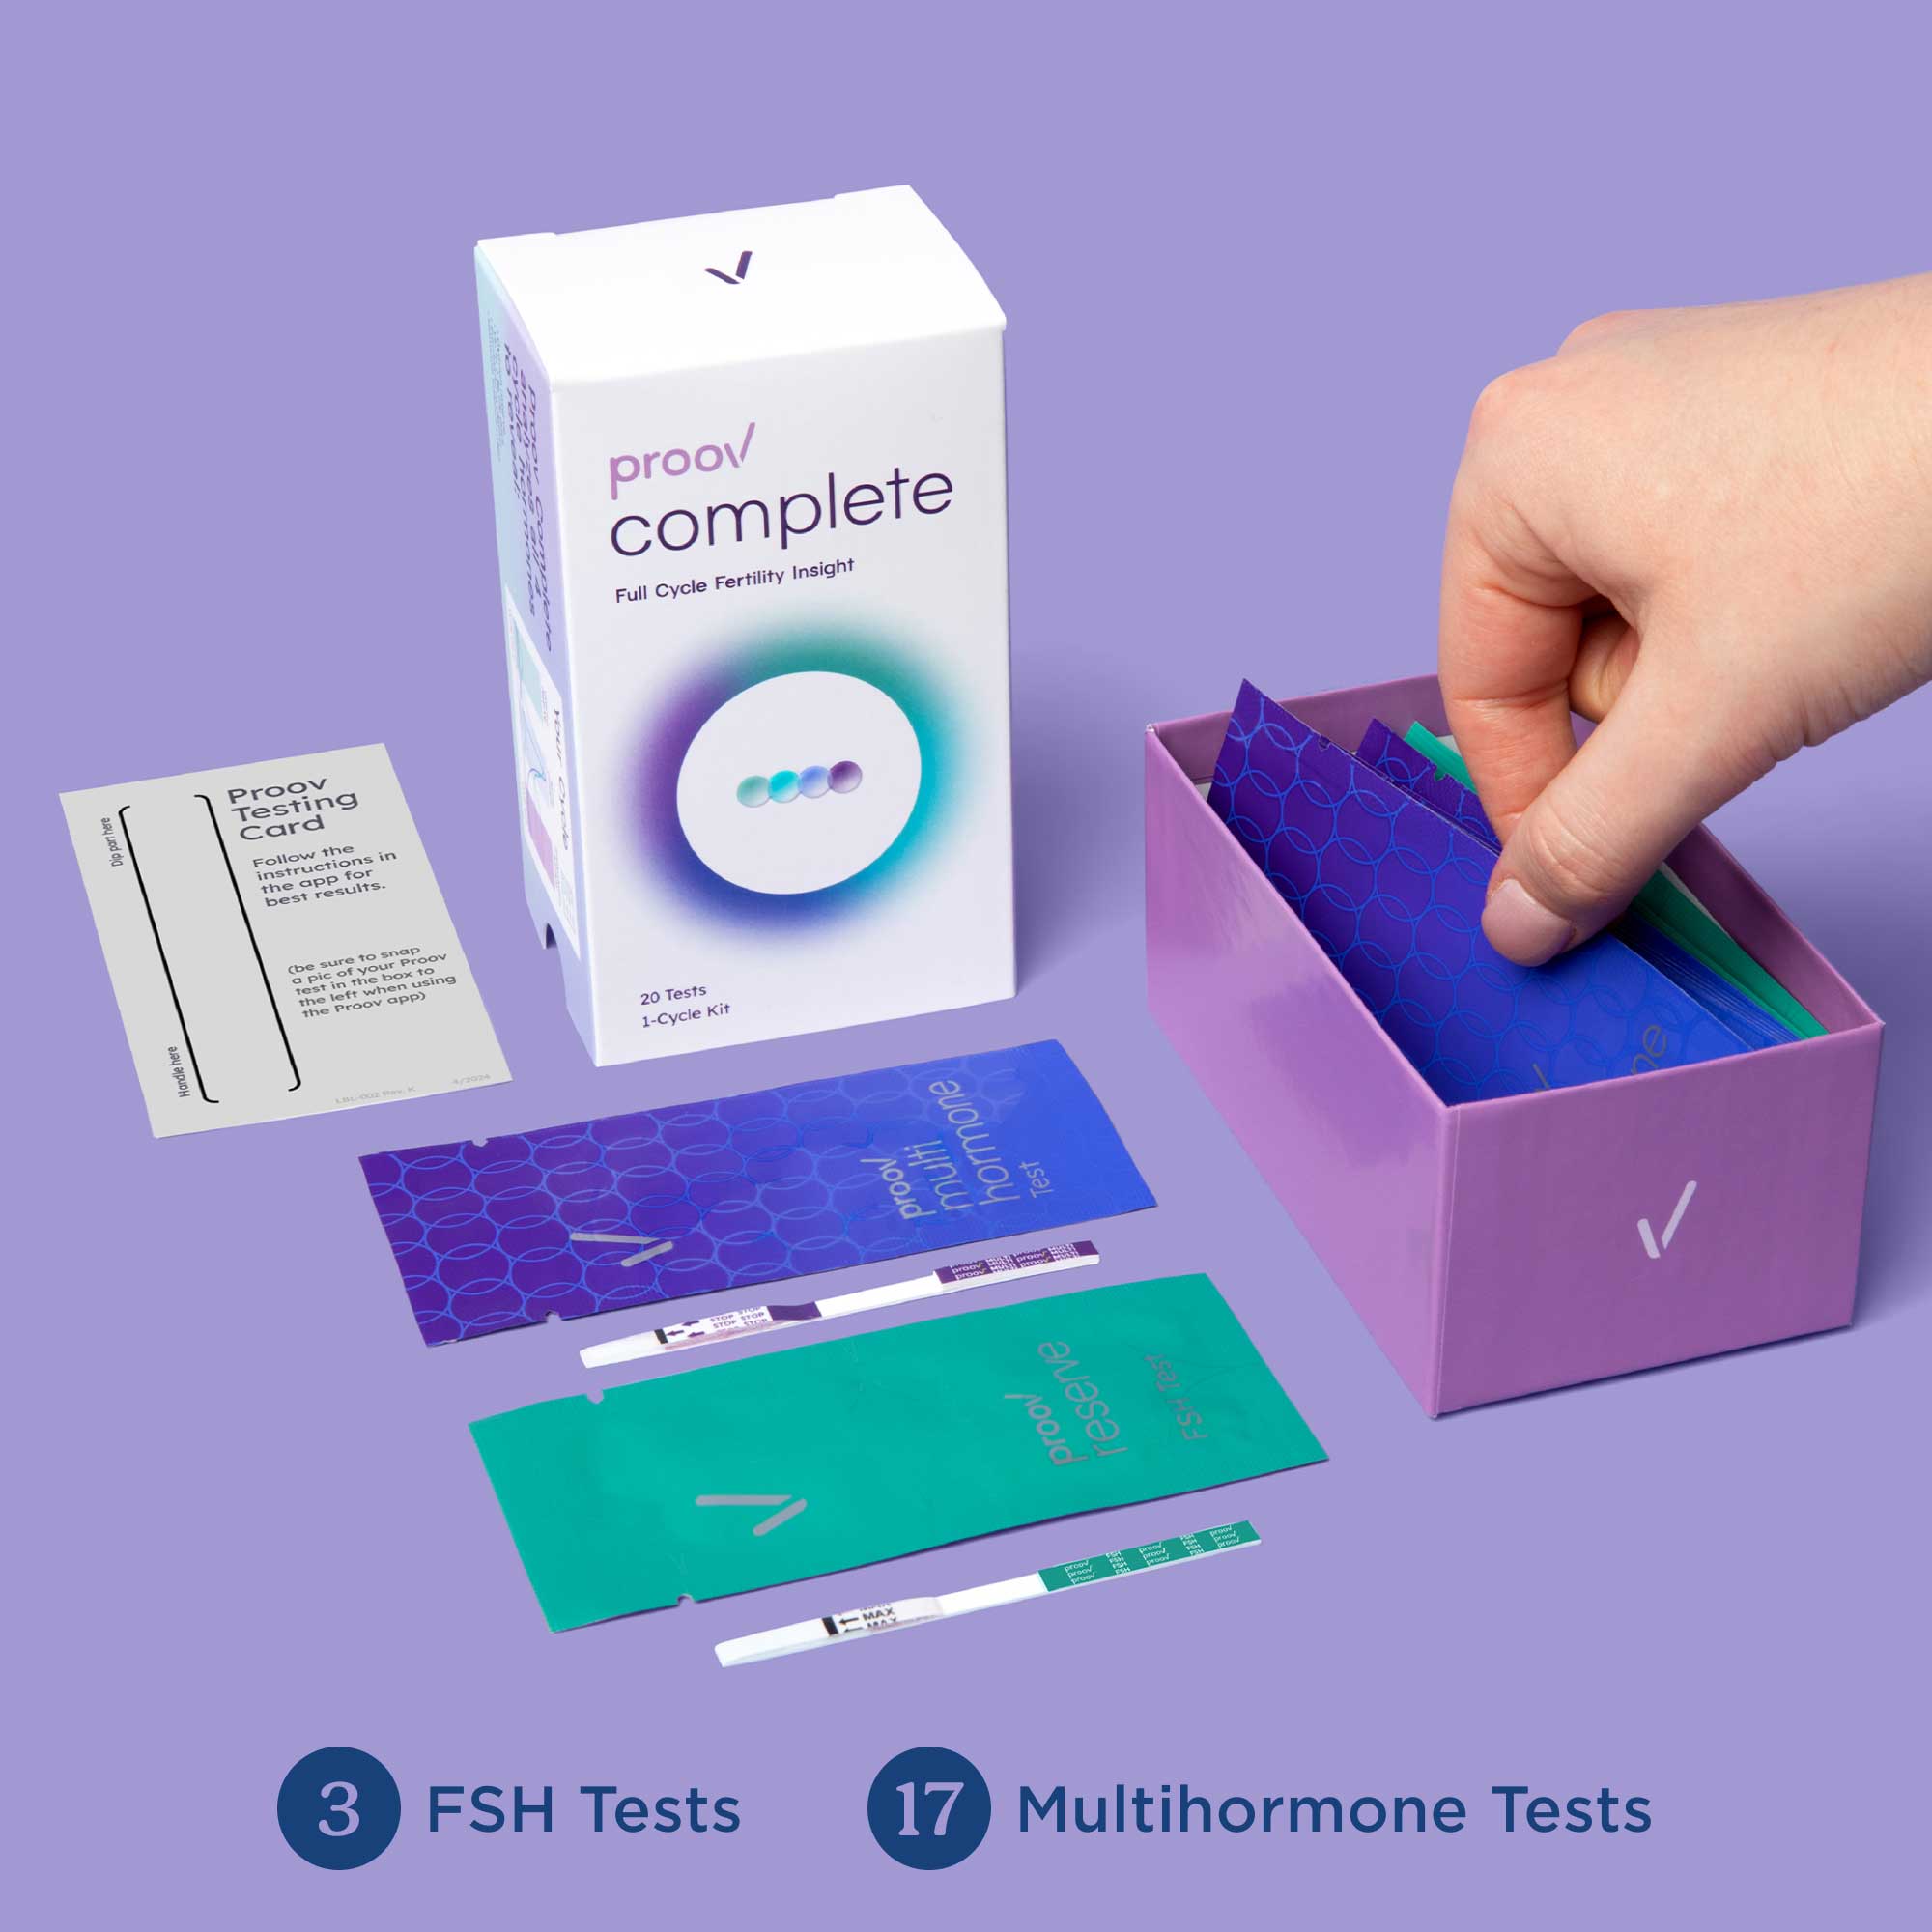 Proov Complete Testing Kit with 3 FSH Tests and 17 Multihormone tests on a purple surface